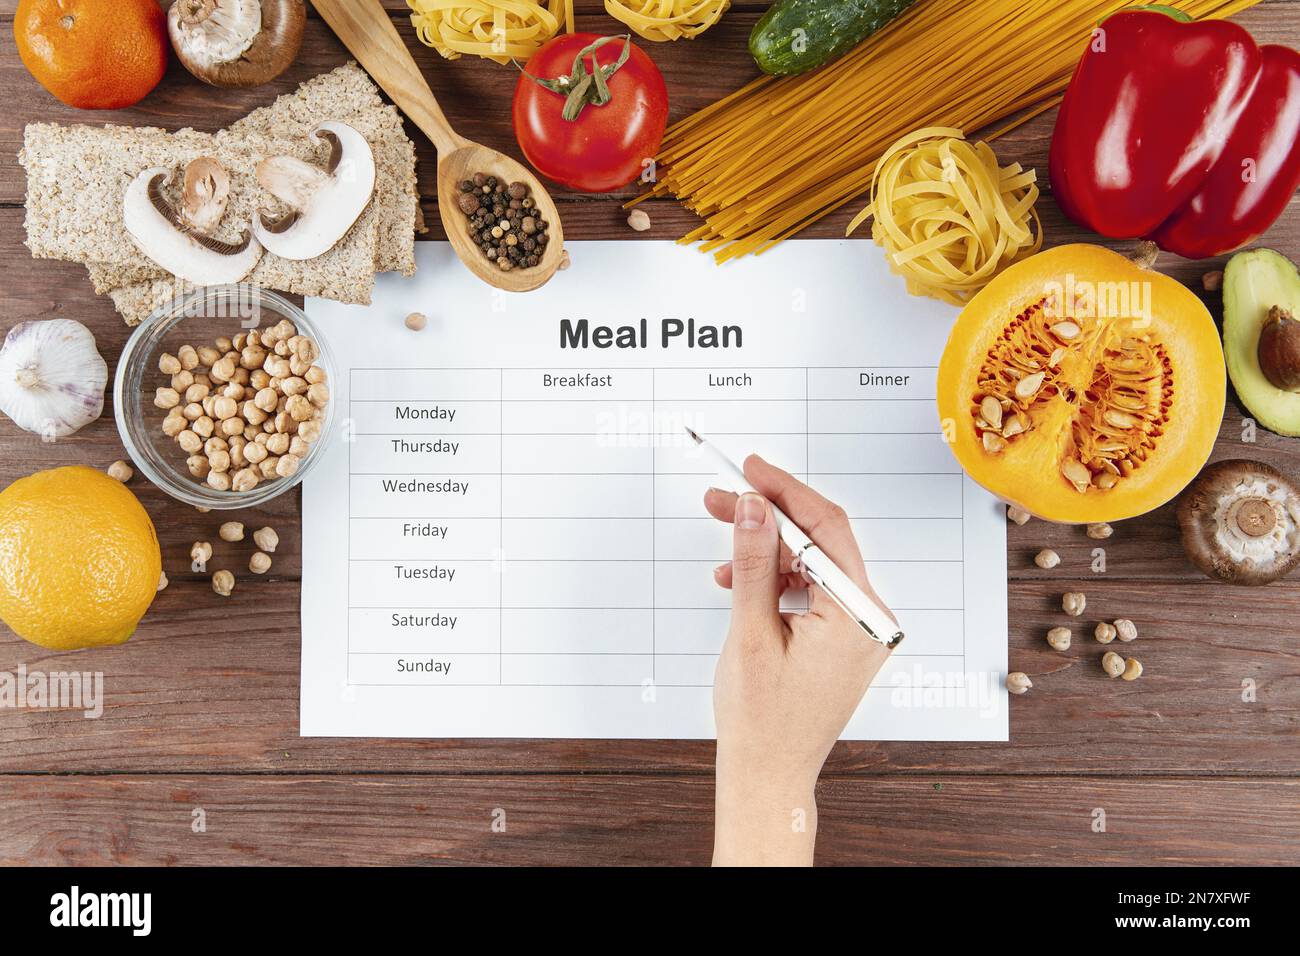 flat lay meal plan with pasta ingredients Stock Photo